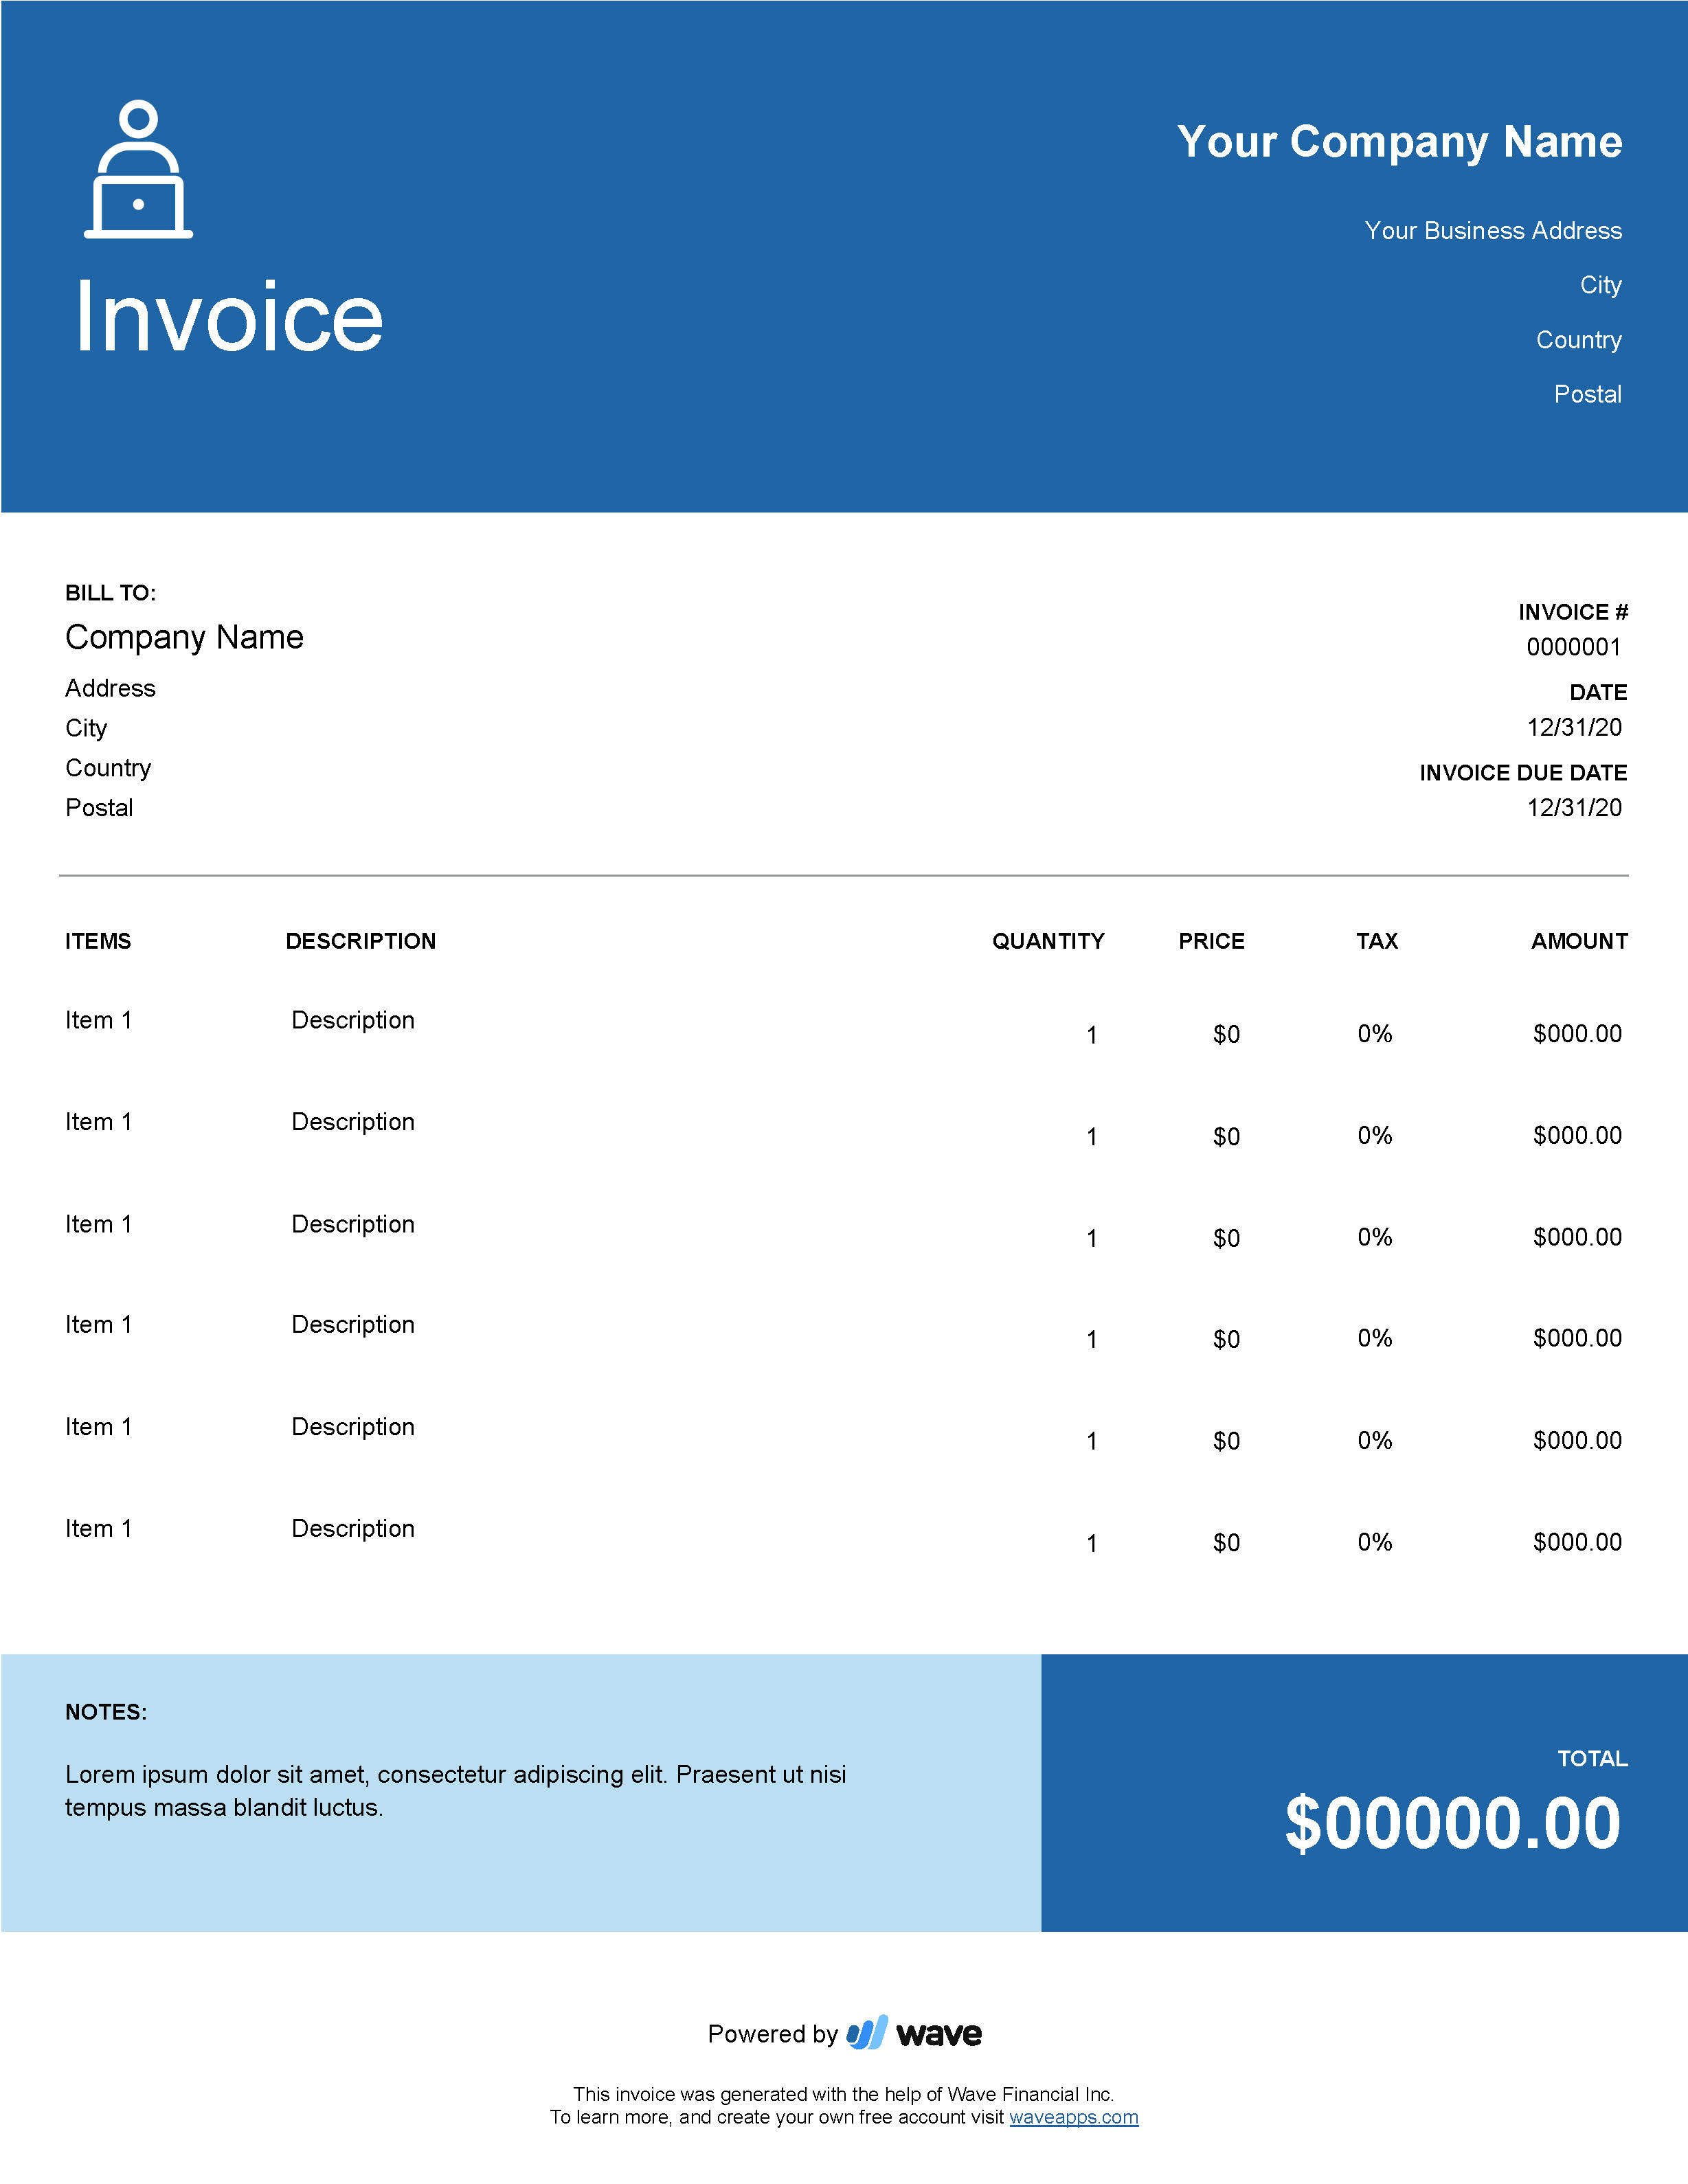 Detail Personal Invoice Template Excel Nomer 13